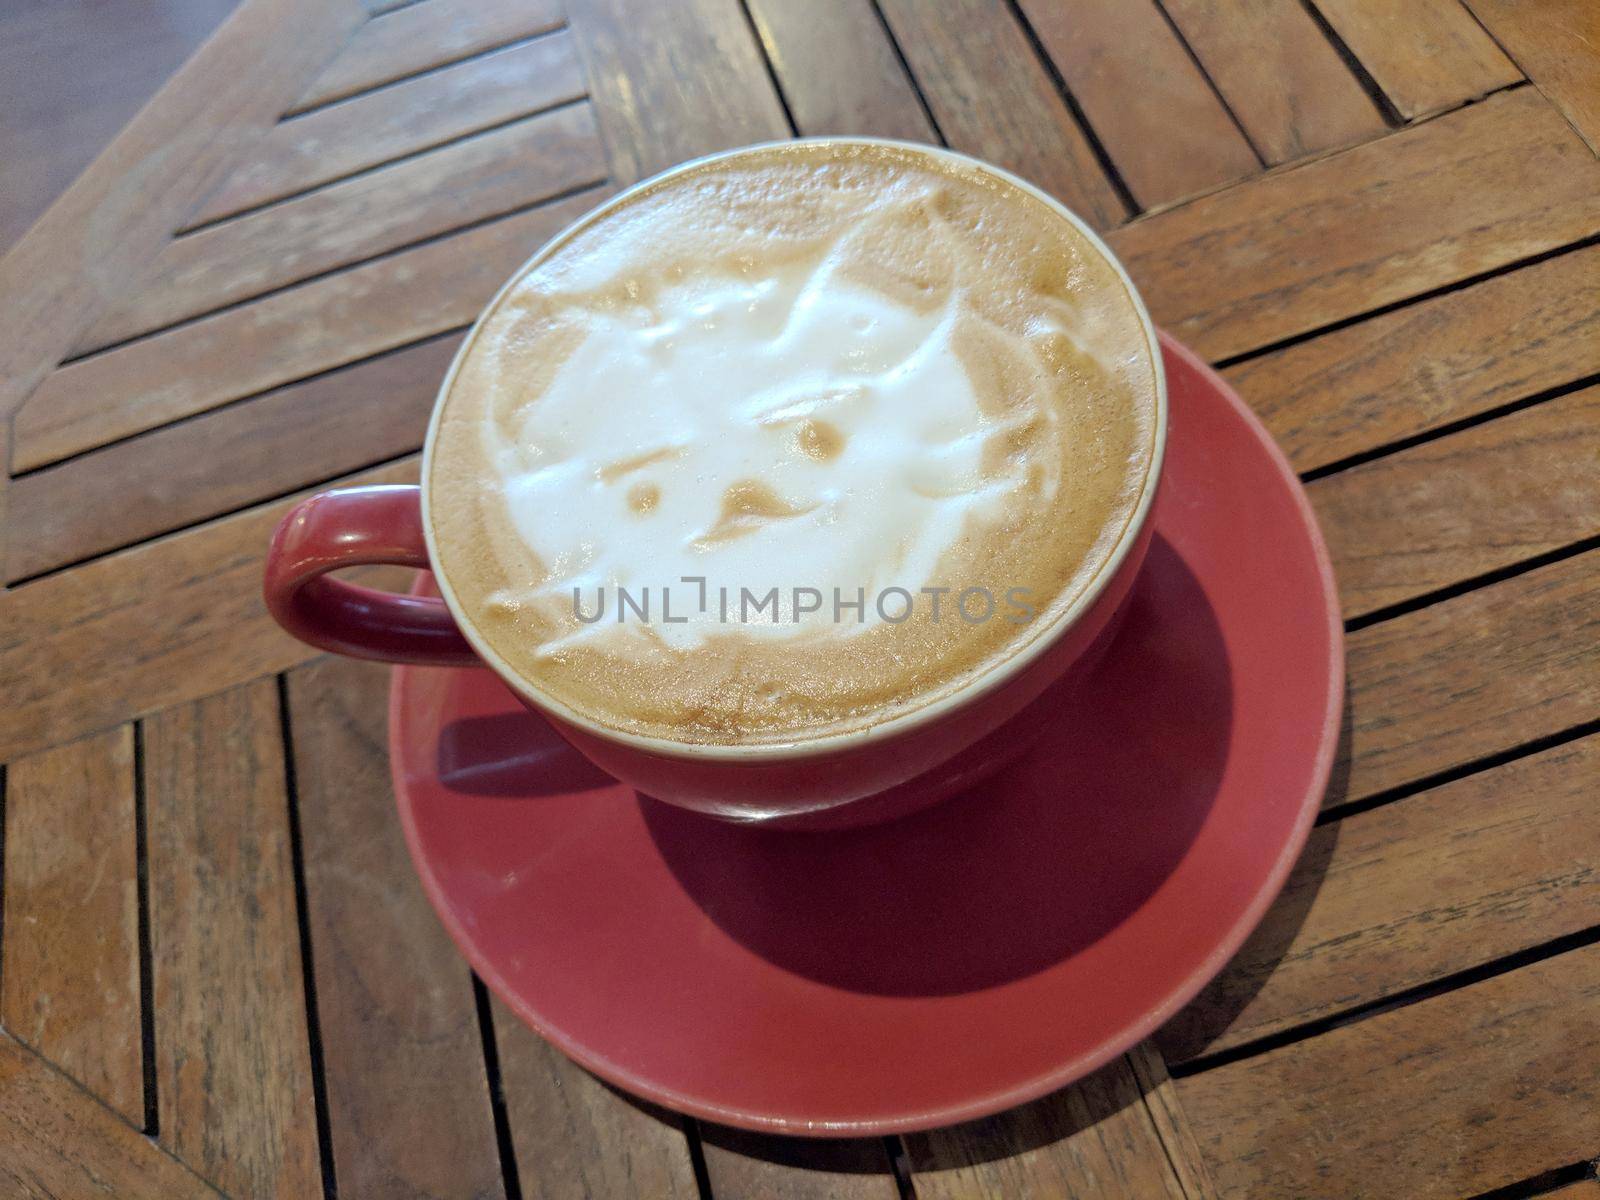 Red cup of Cappuccino on saucer with a cat face pattern in foam on table.